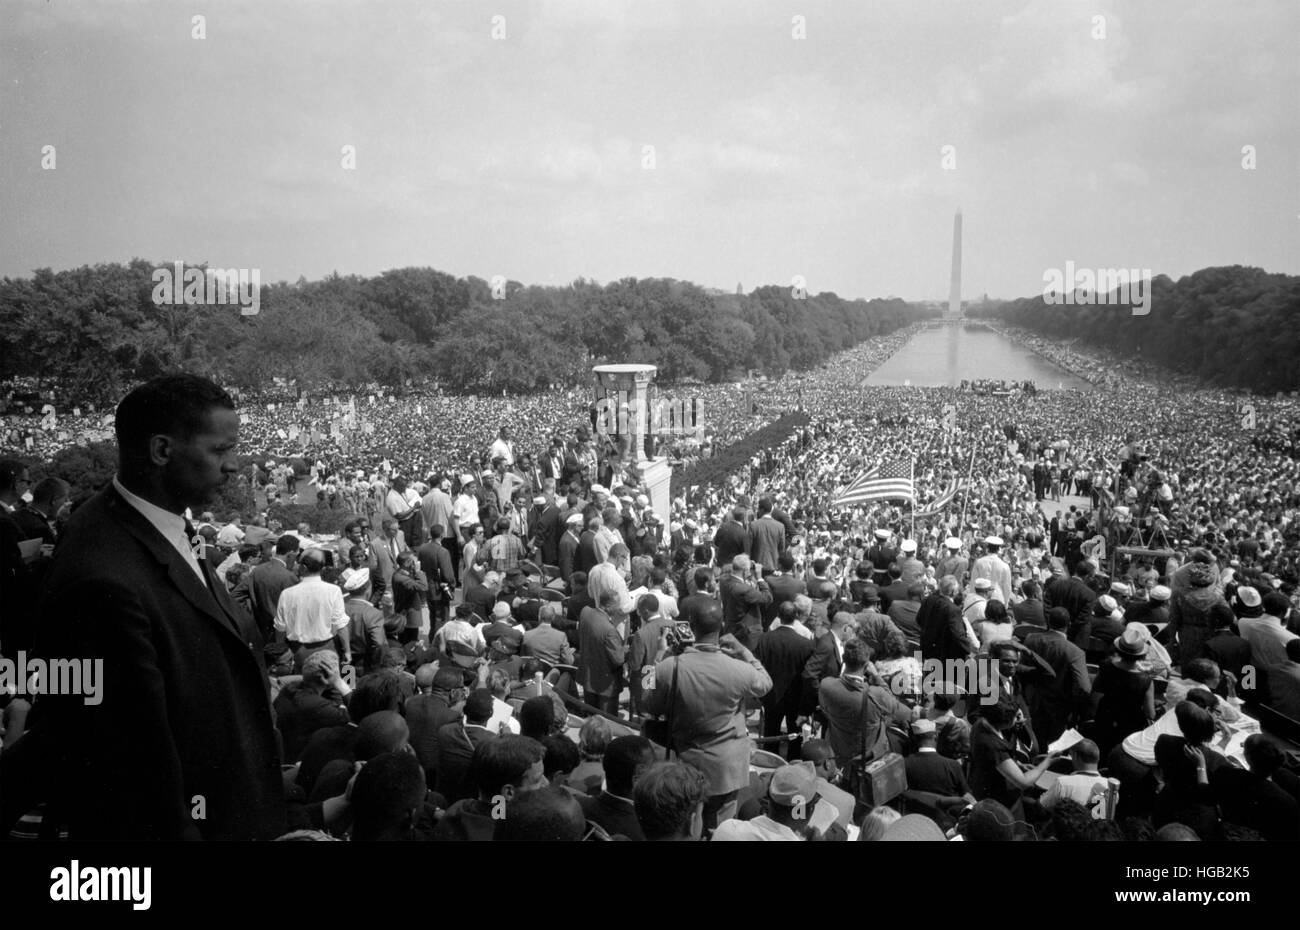 August 28, 1963 - A huge crowd at the National Mall in Washington, D.C. Stock Photo